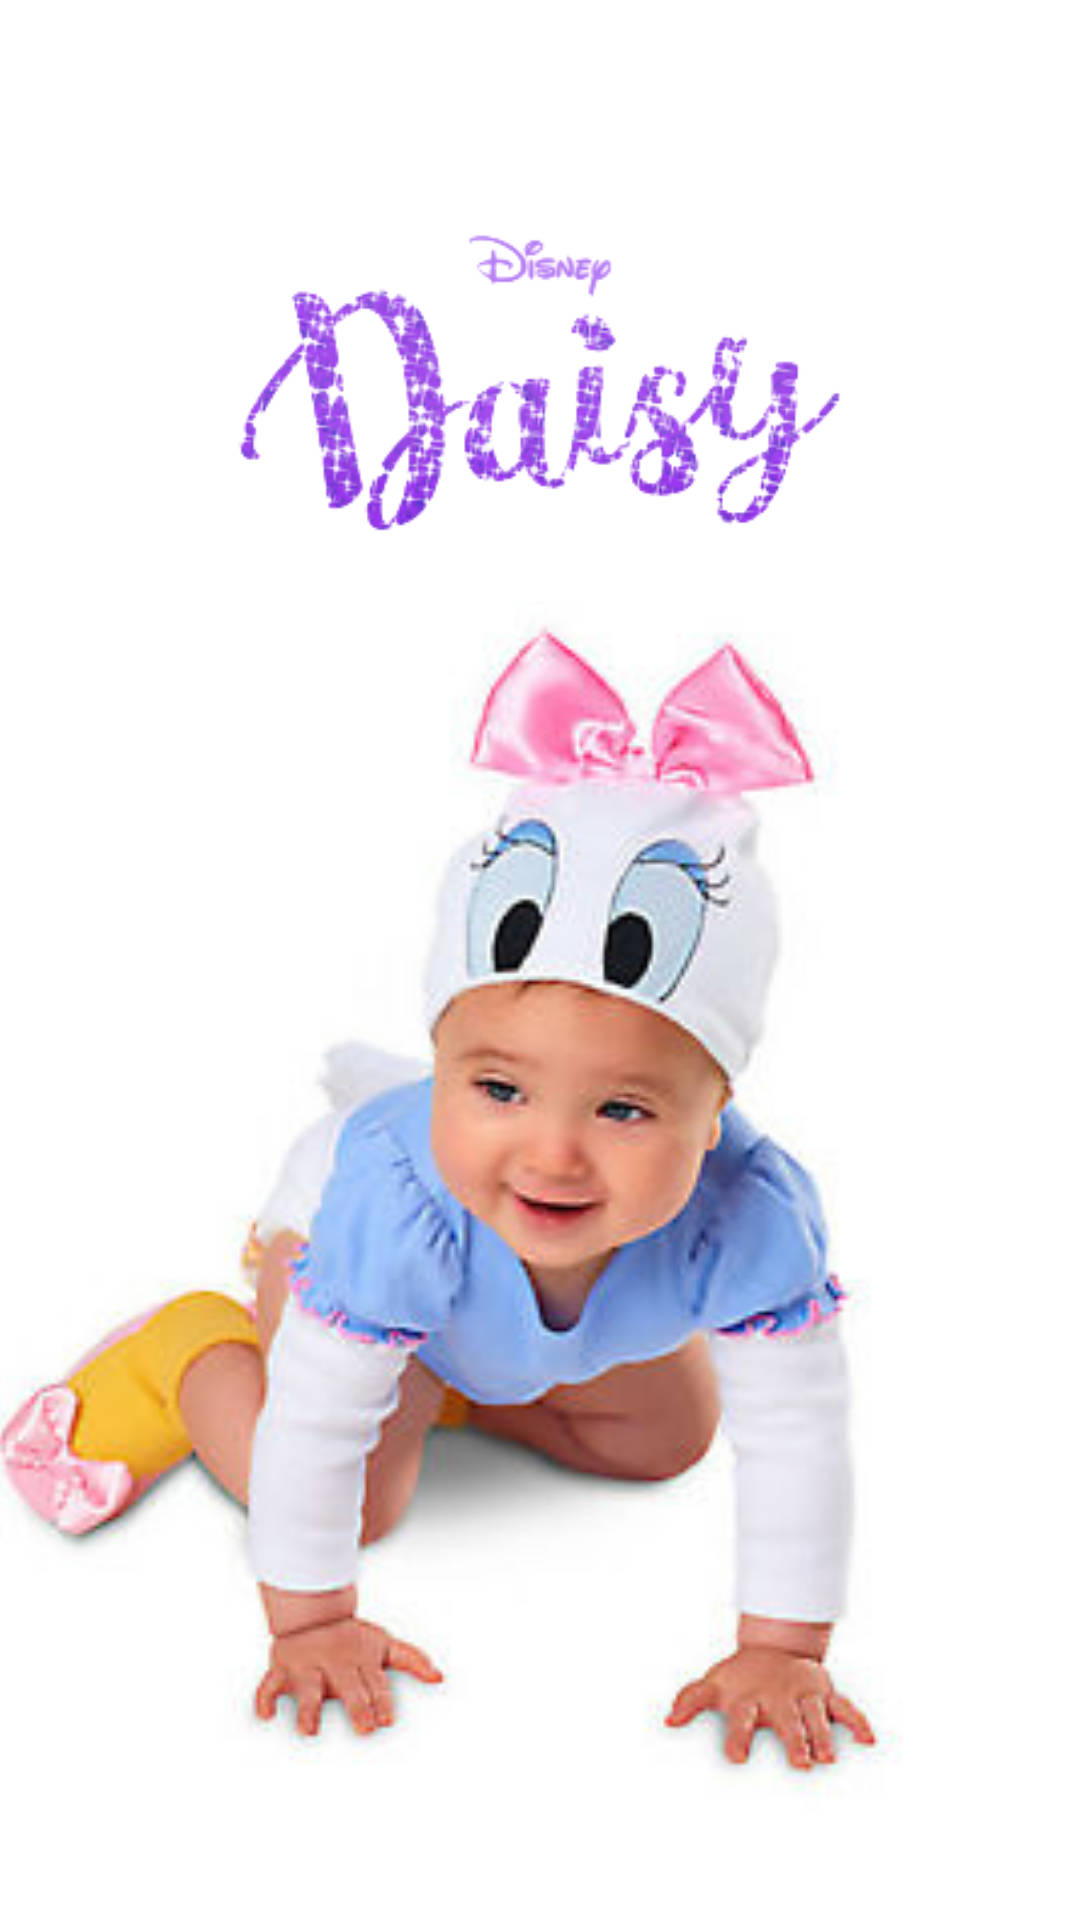 Adorable Baby In Daisy Duck Costume